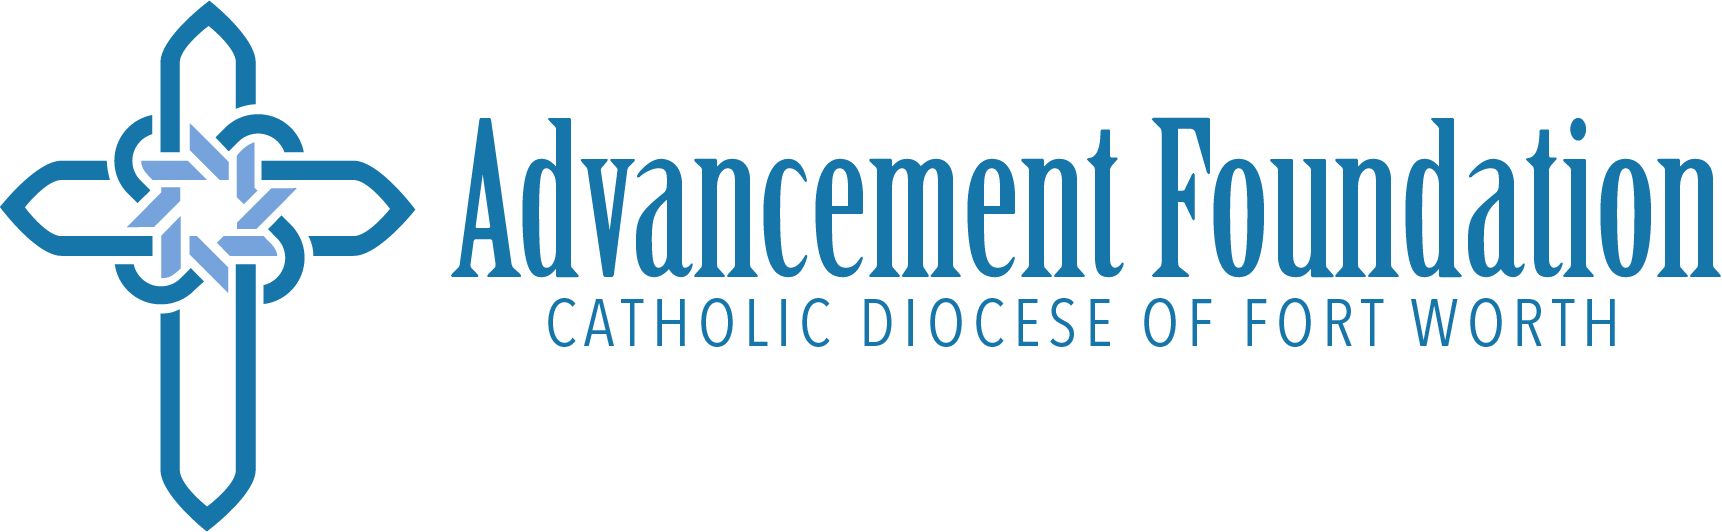 Catholic Diocese of Fort Worth Advancement Foundation logo